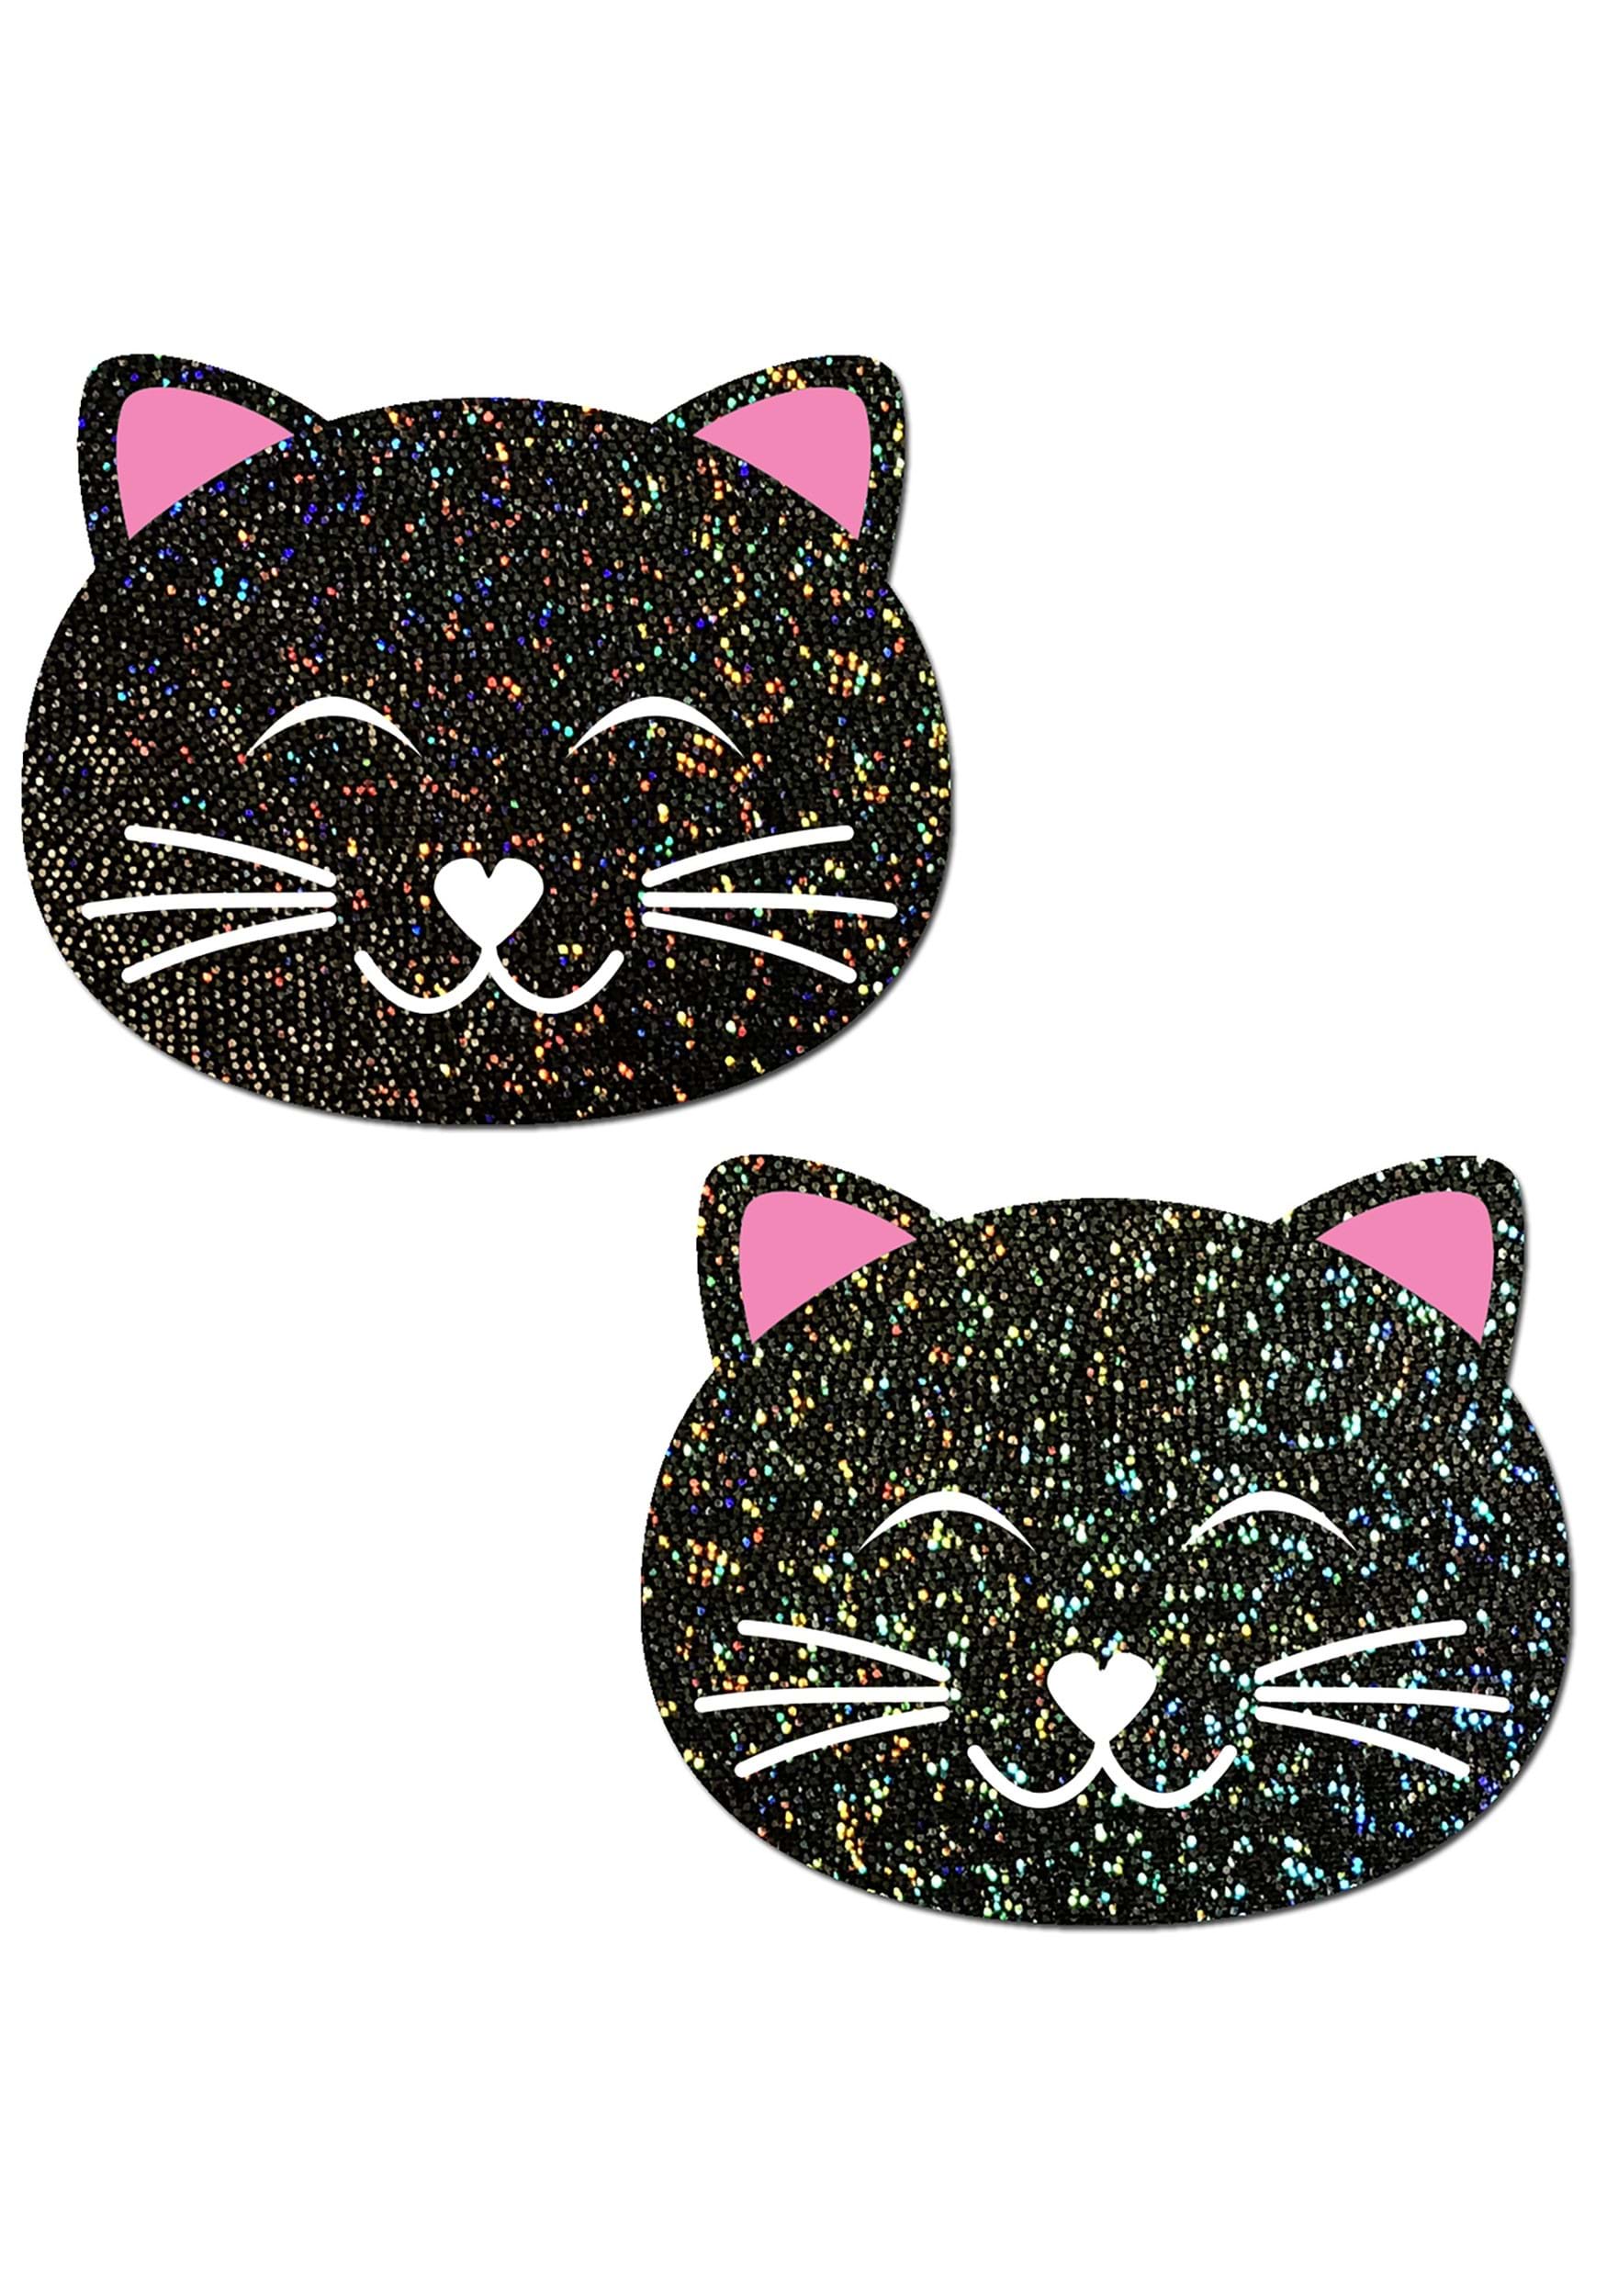 Pastaase Black Cat Glitter Pasties para adultos Multicolor Colombia